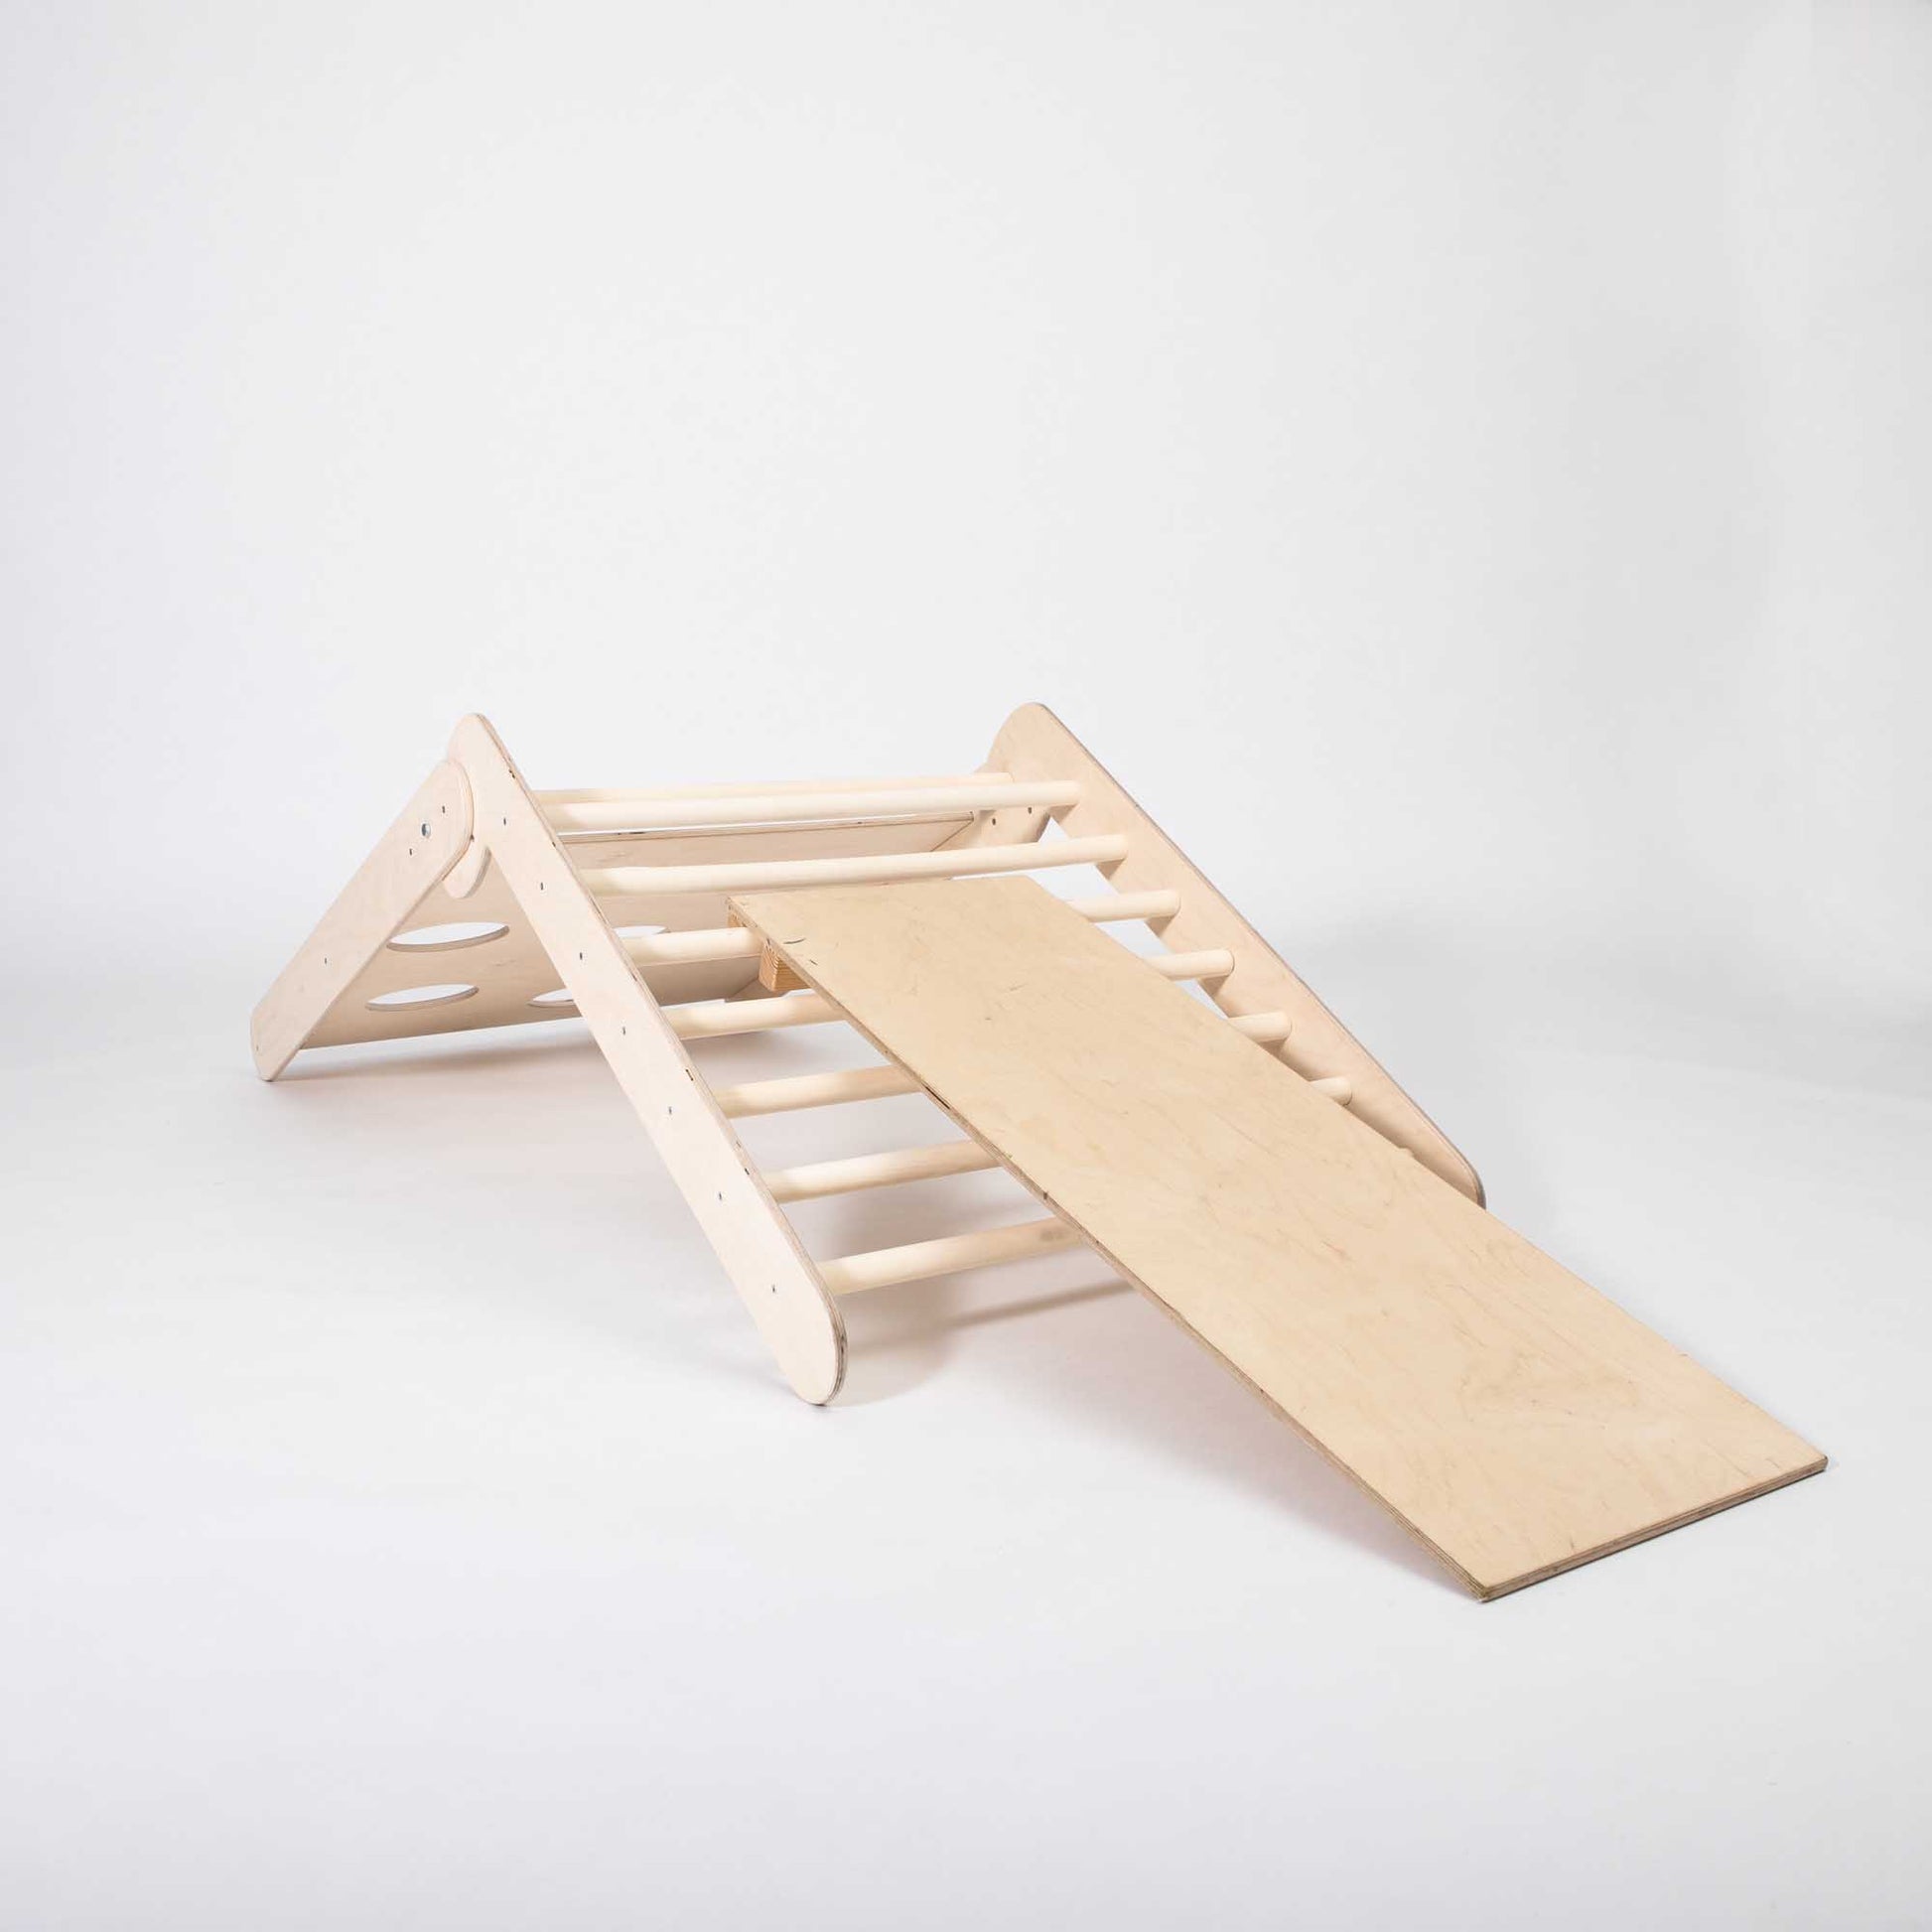 A Transformable climbing triangle with 2 sensory panels with a slide on it.